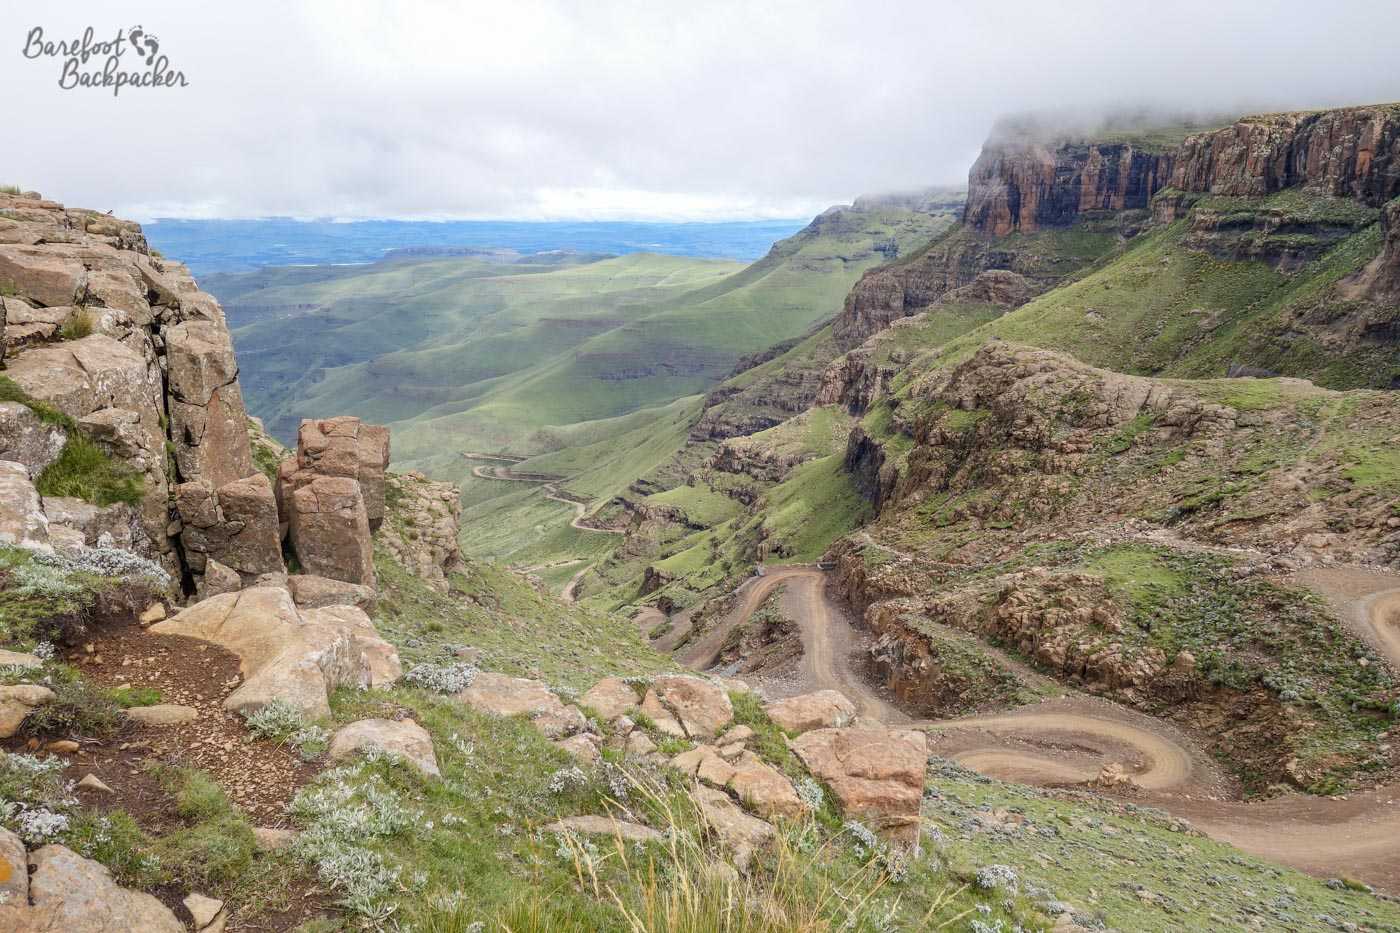 Looking out from the Sani Pass Lodge down the Sani Pass itself – the cloud has cleared and you can see the road winding downhill in its full glory.